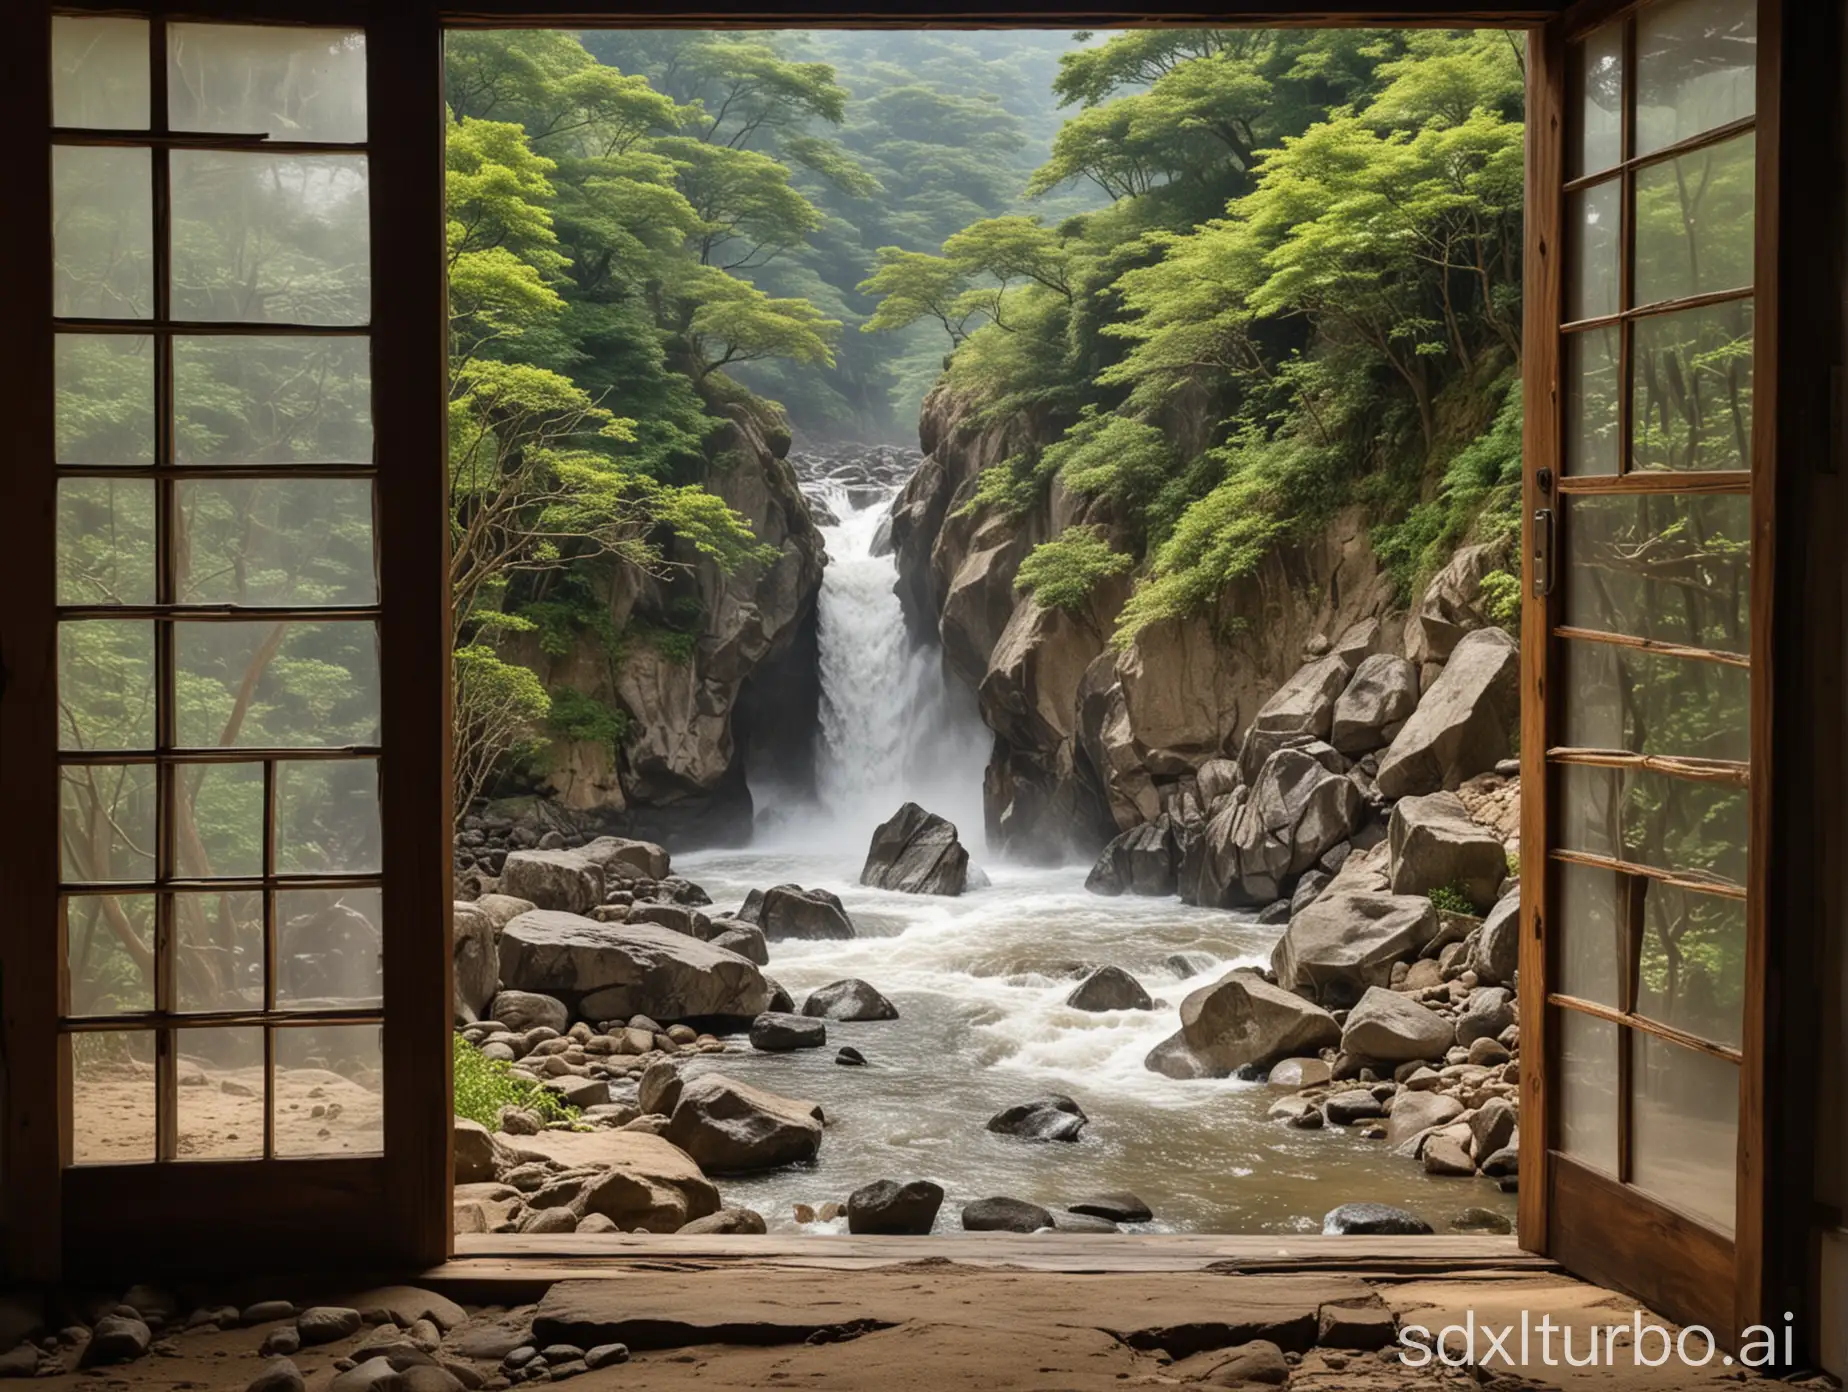 Inside of a Japanese roykan on Miyajimi island viewing in background through open door a beautiful rushing mountain stream crashing down a steep riverbed